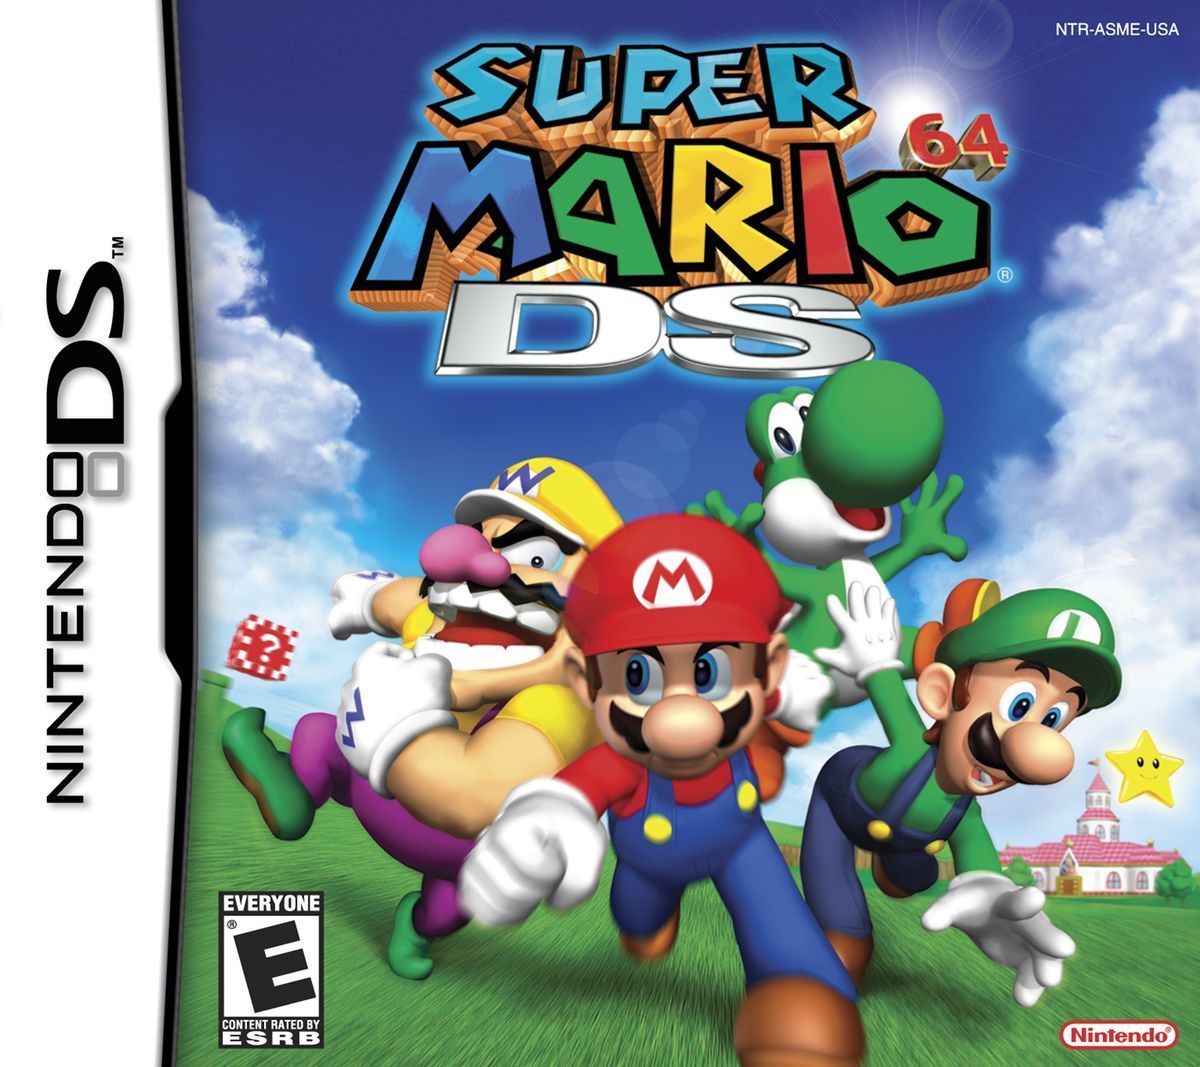 The 15 Best Nintendo DS Games of All Time